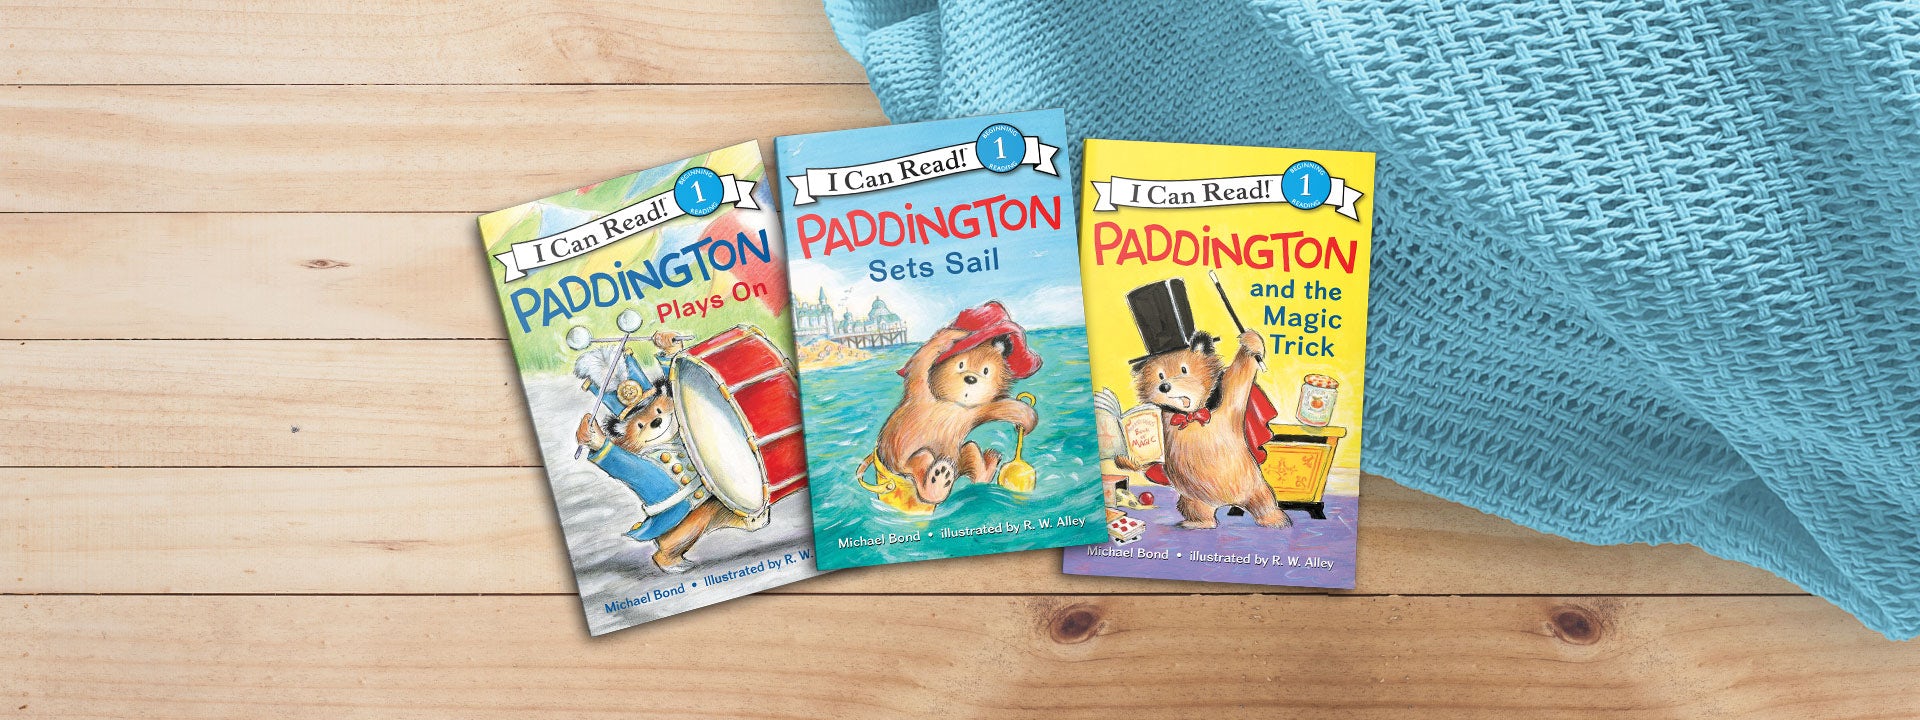 6 Things You Might Not Know About Paddington Bear!